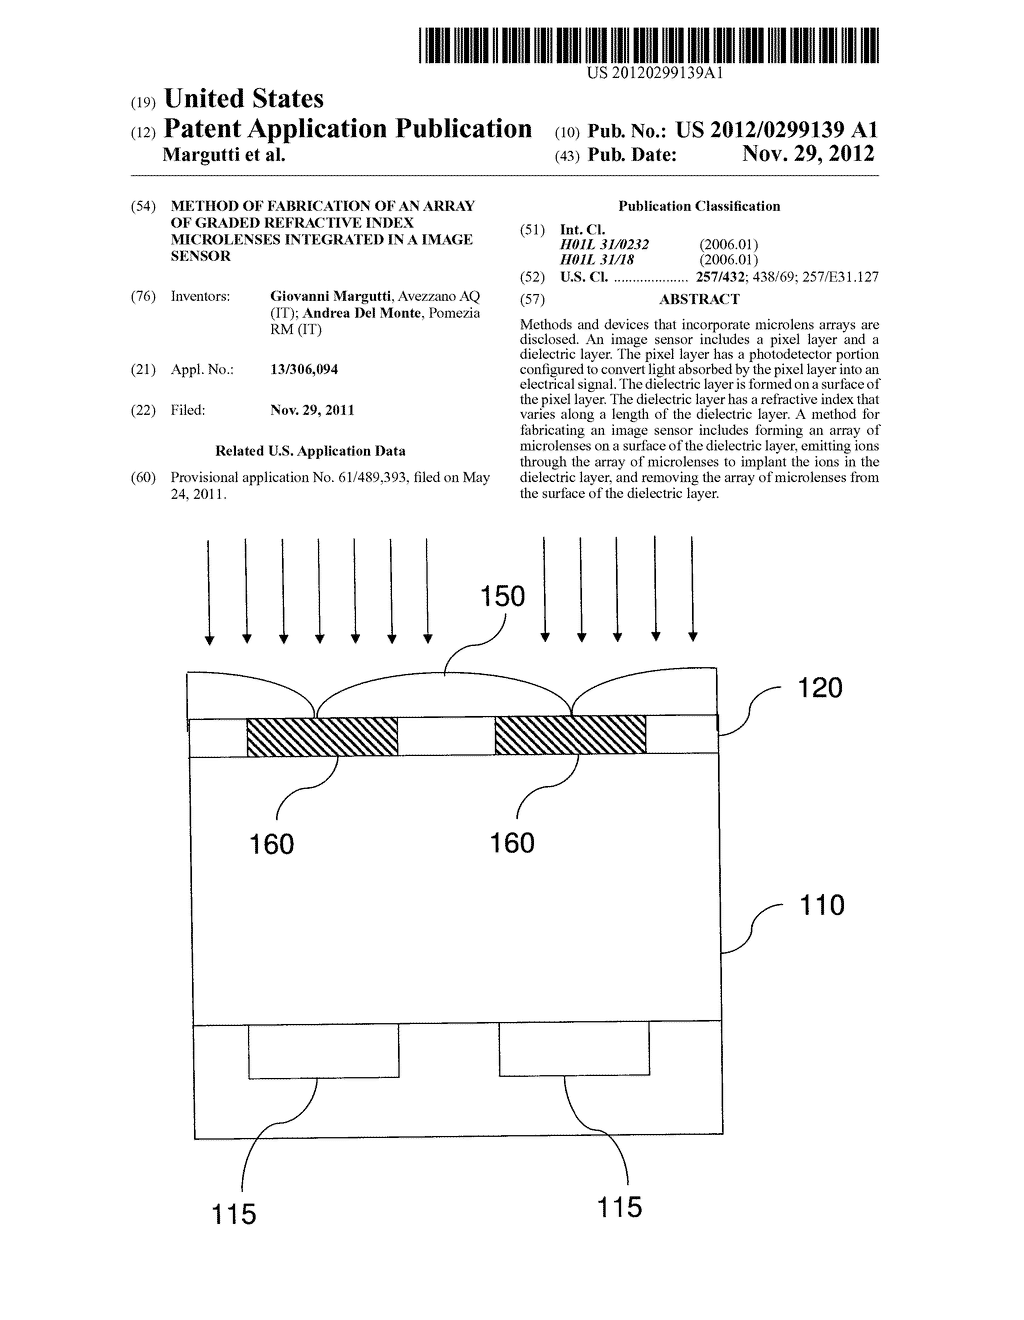 METHOD OF FABRICATION OF AN ARRAY OF GRADED REFRACTIVE INDEX MICROLENSES     INTEGRATED IN A IMAGE SENSOR - diagram, schematic, and image 01